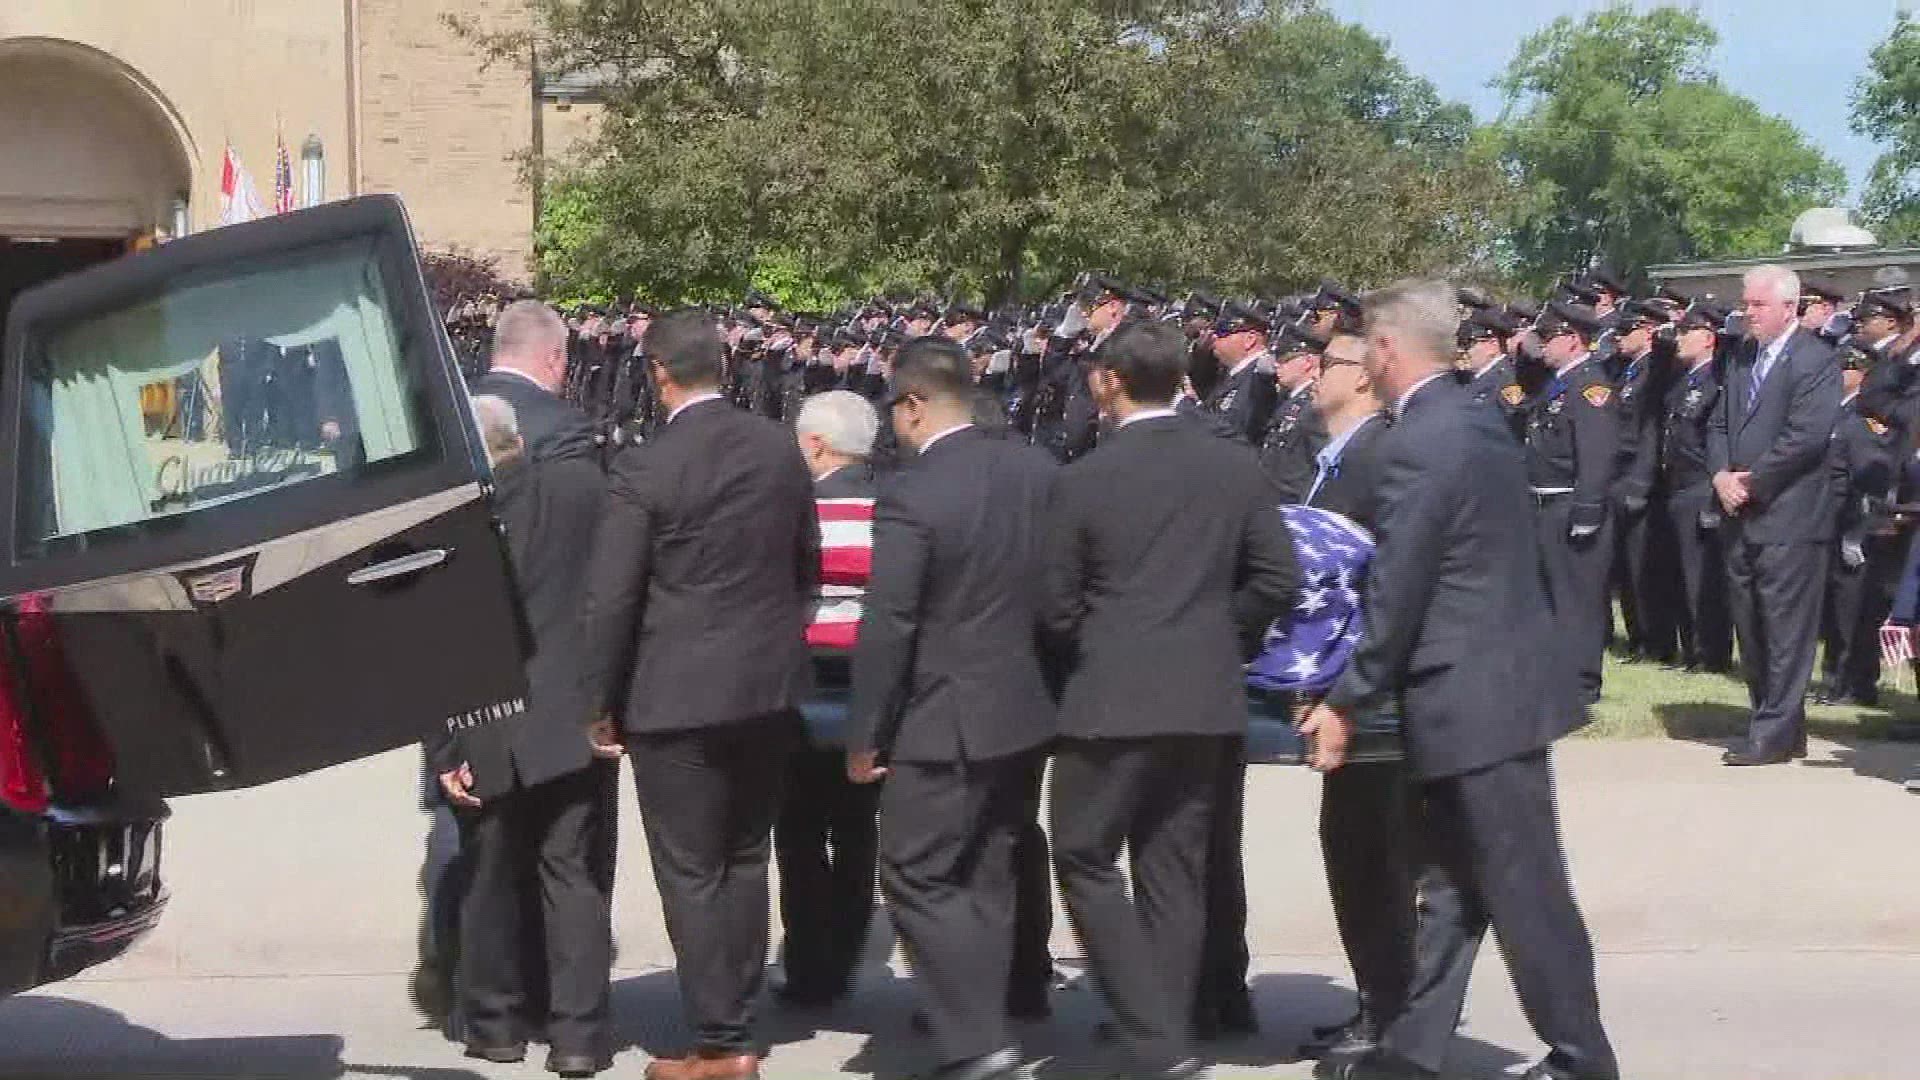 July 12, 2018: The community is honoring fallen Cleveland officer Vu Nguyen as he's laid to rest.